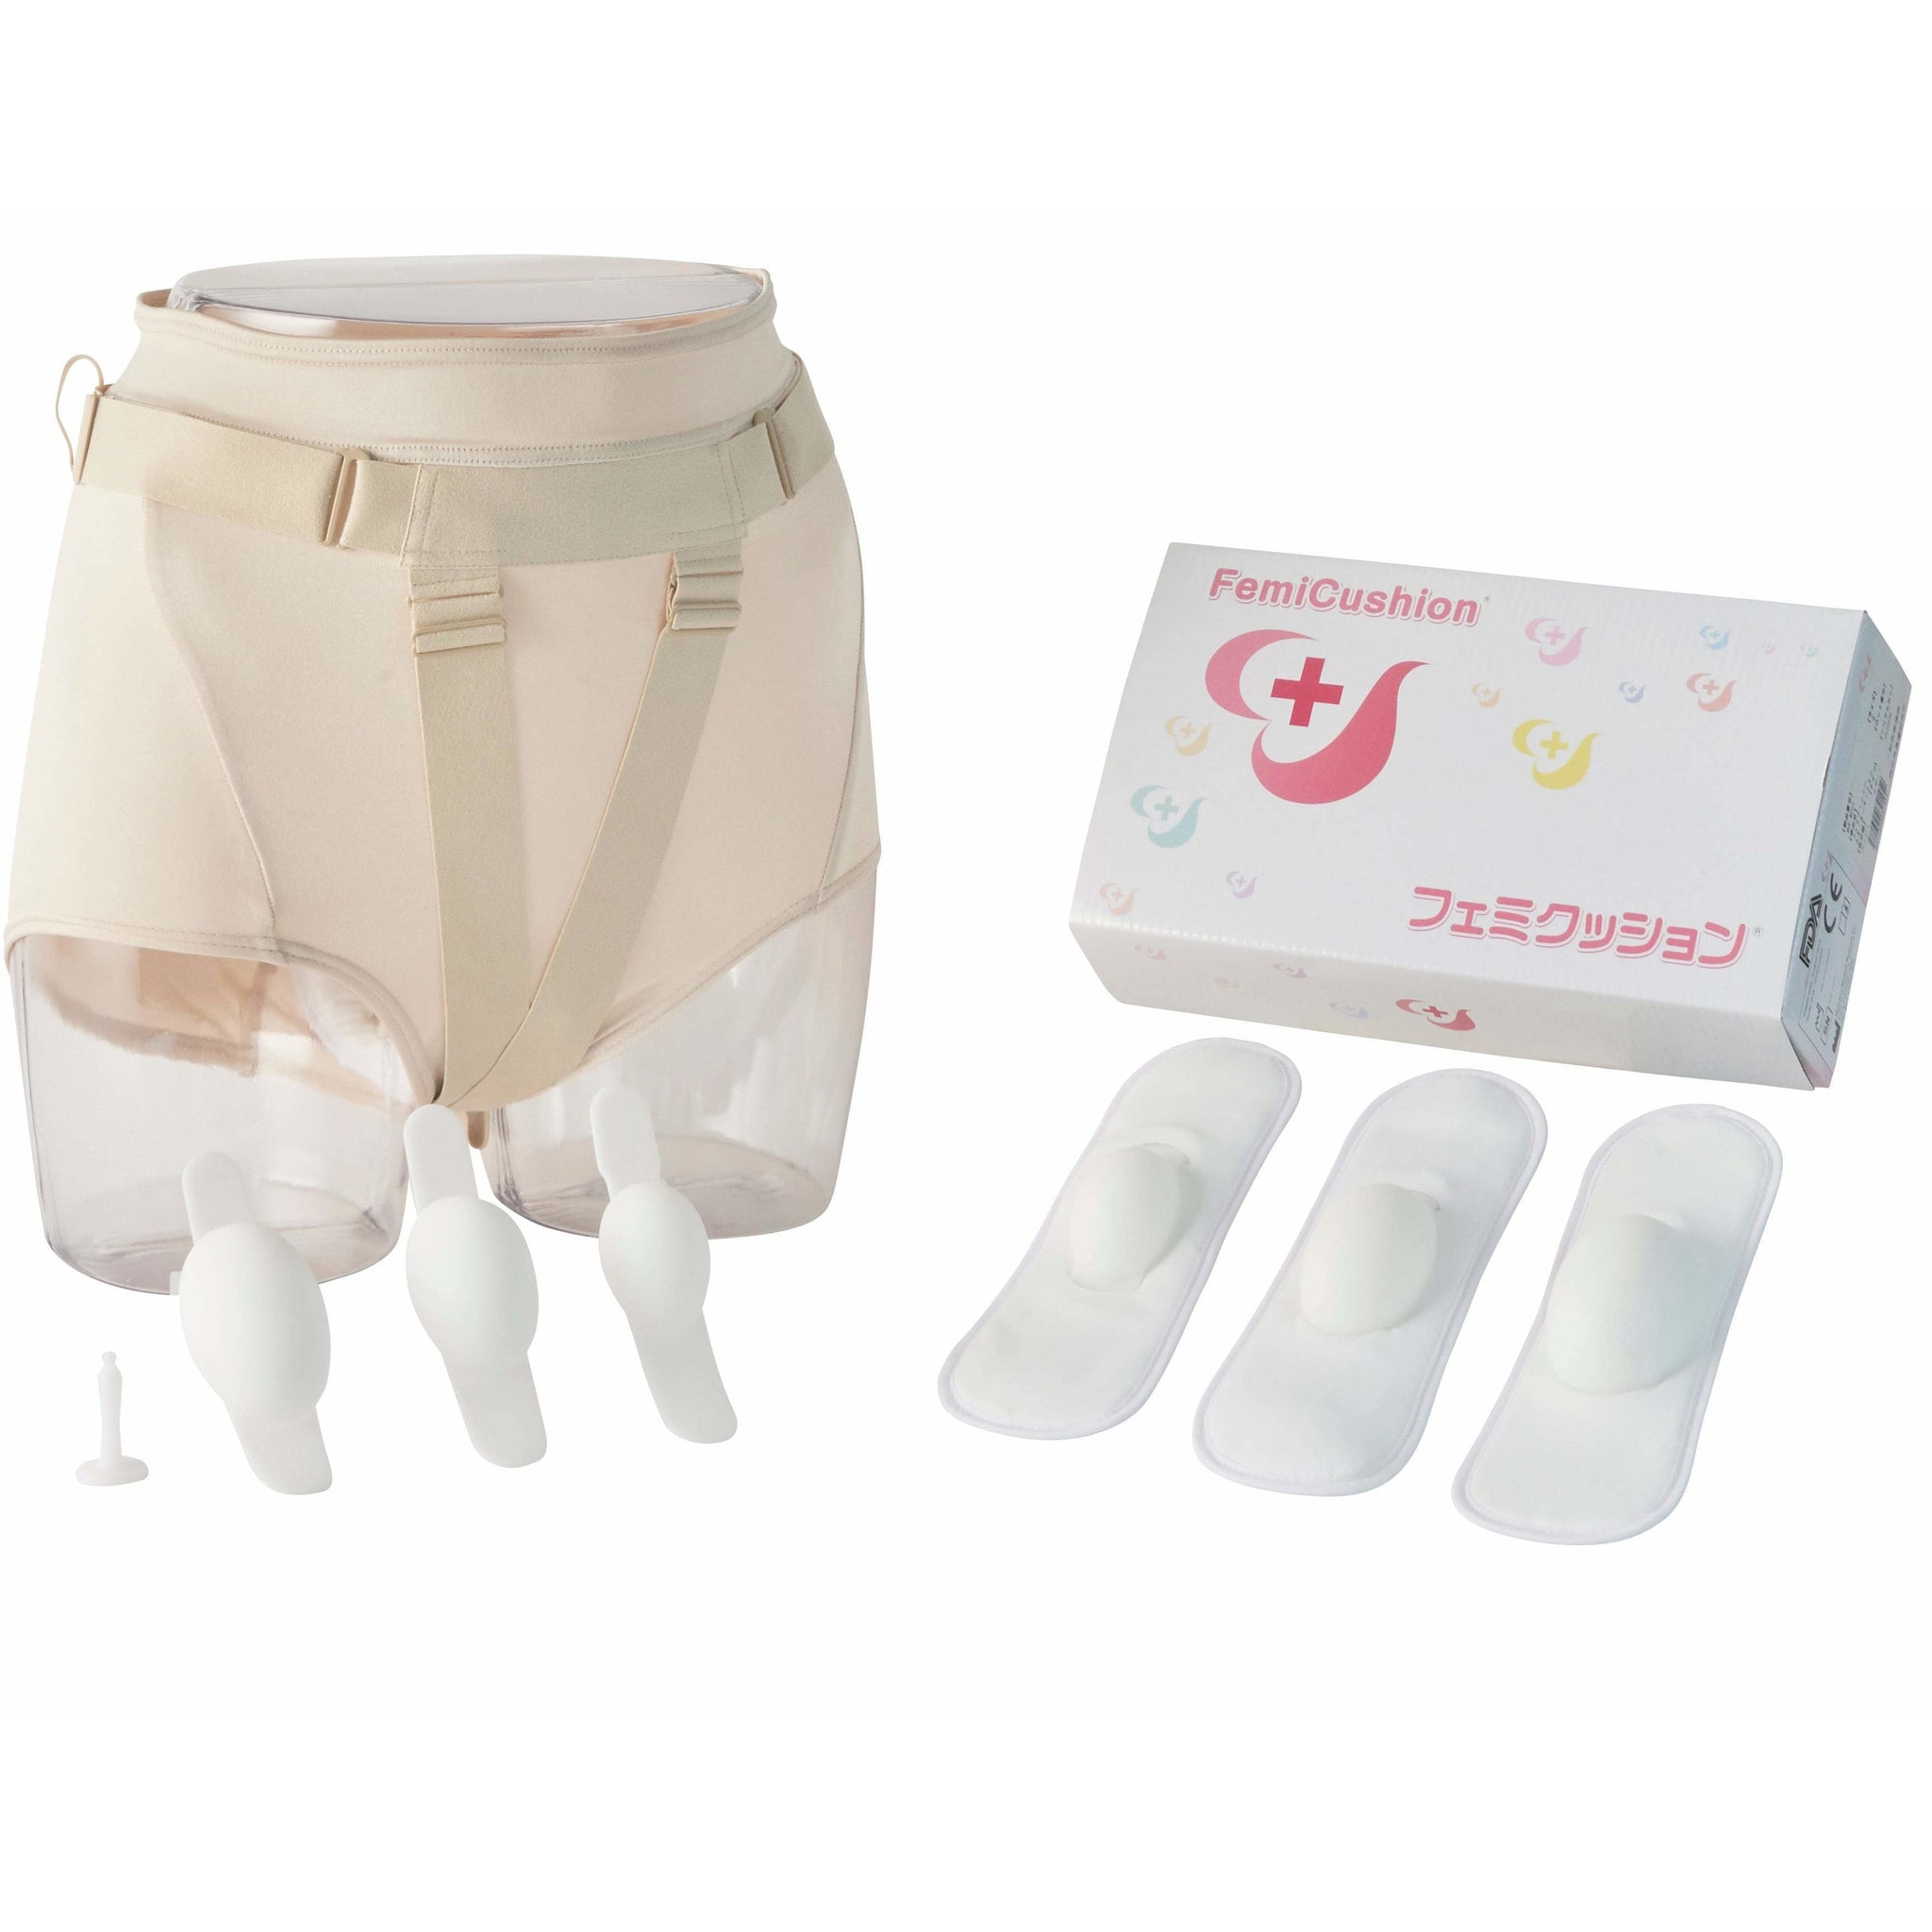 FemiCushion Standard Deluxe Kit - Prolapse Relief Without A